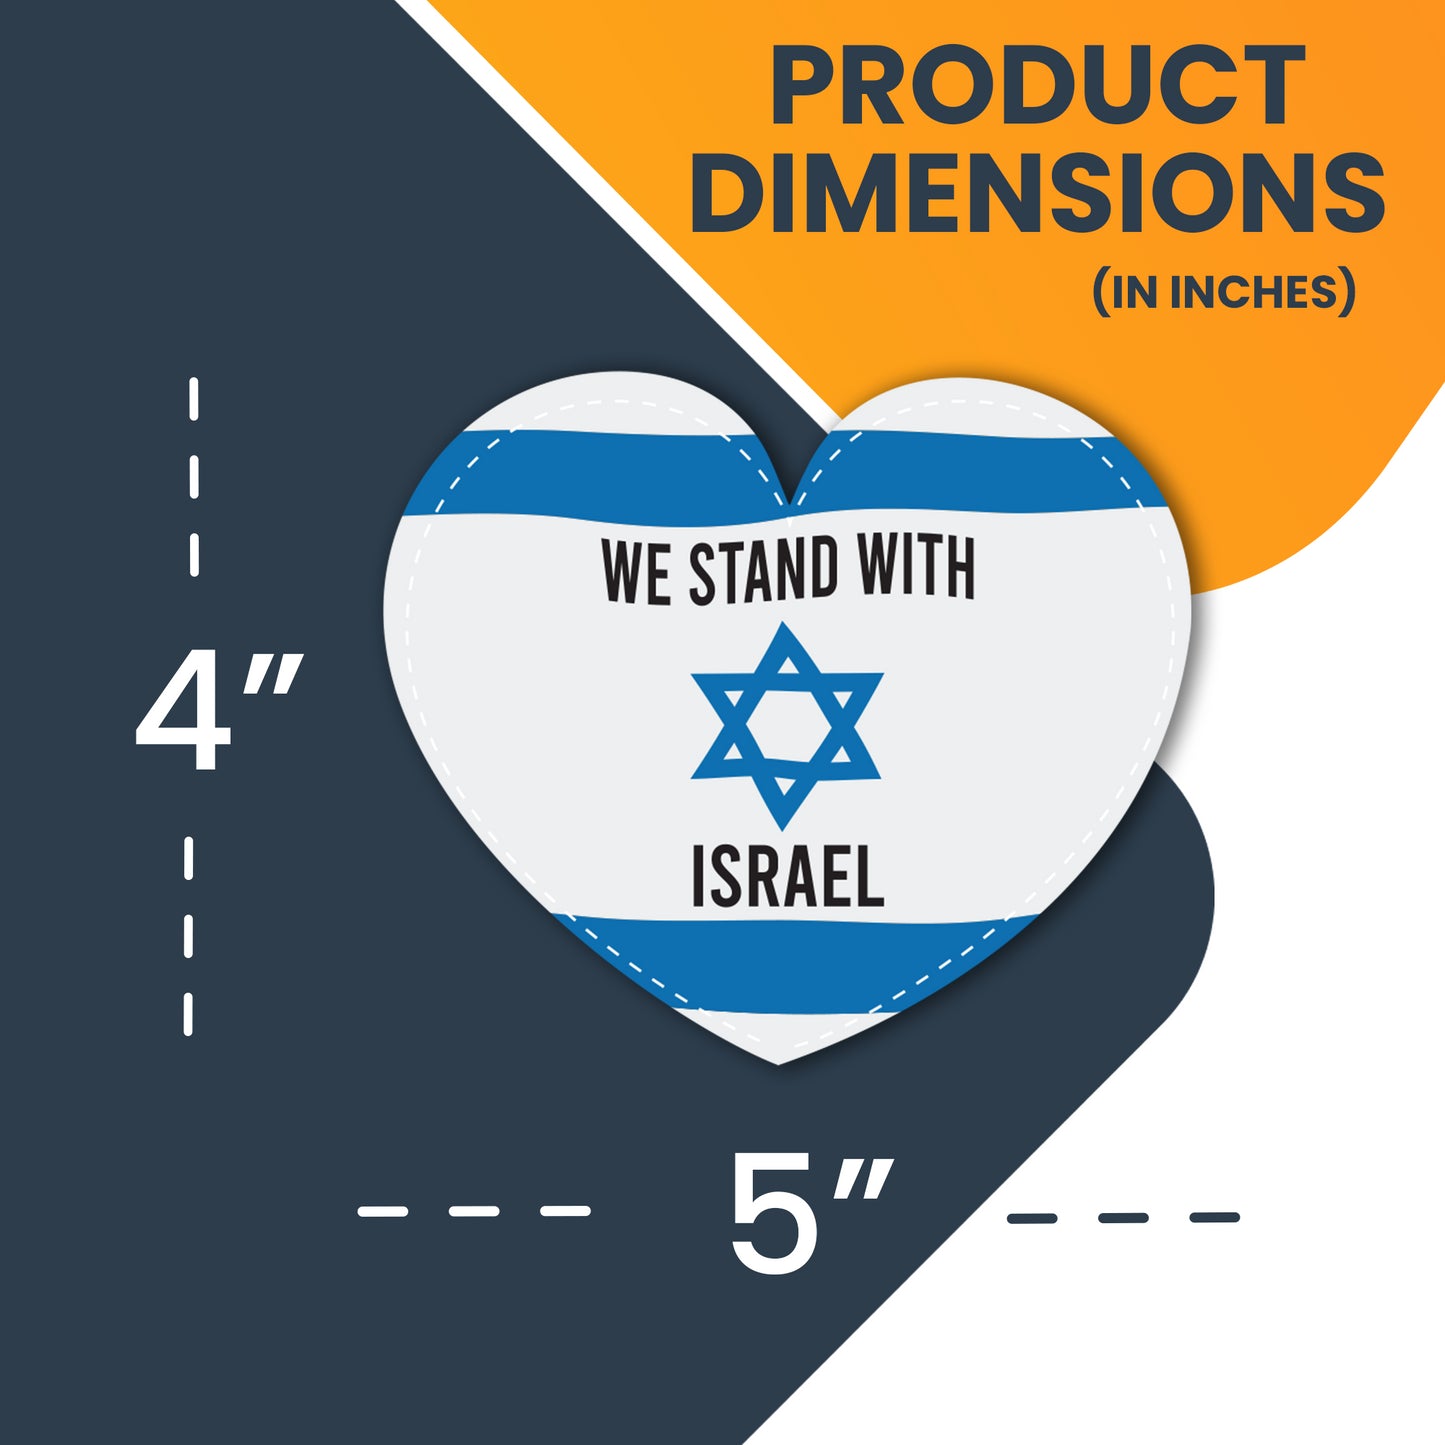 Magnet Me Up We Stand with Israel, Israeli Support Flag Heart Magnet Decal, 5x4 Inches, Heavy Duty Automotive Magnet for Car Truck SUV Or Any Magnetic Surface